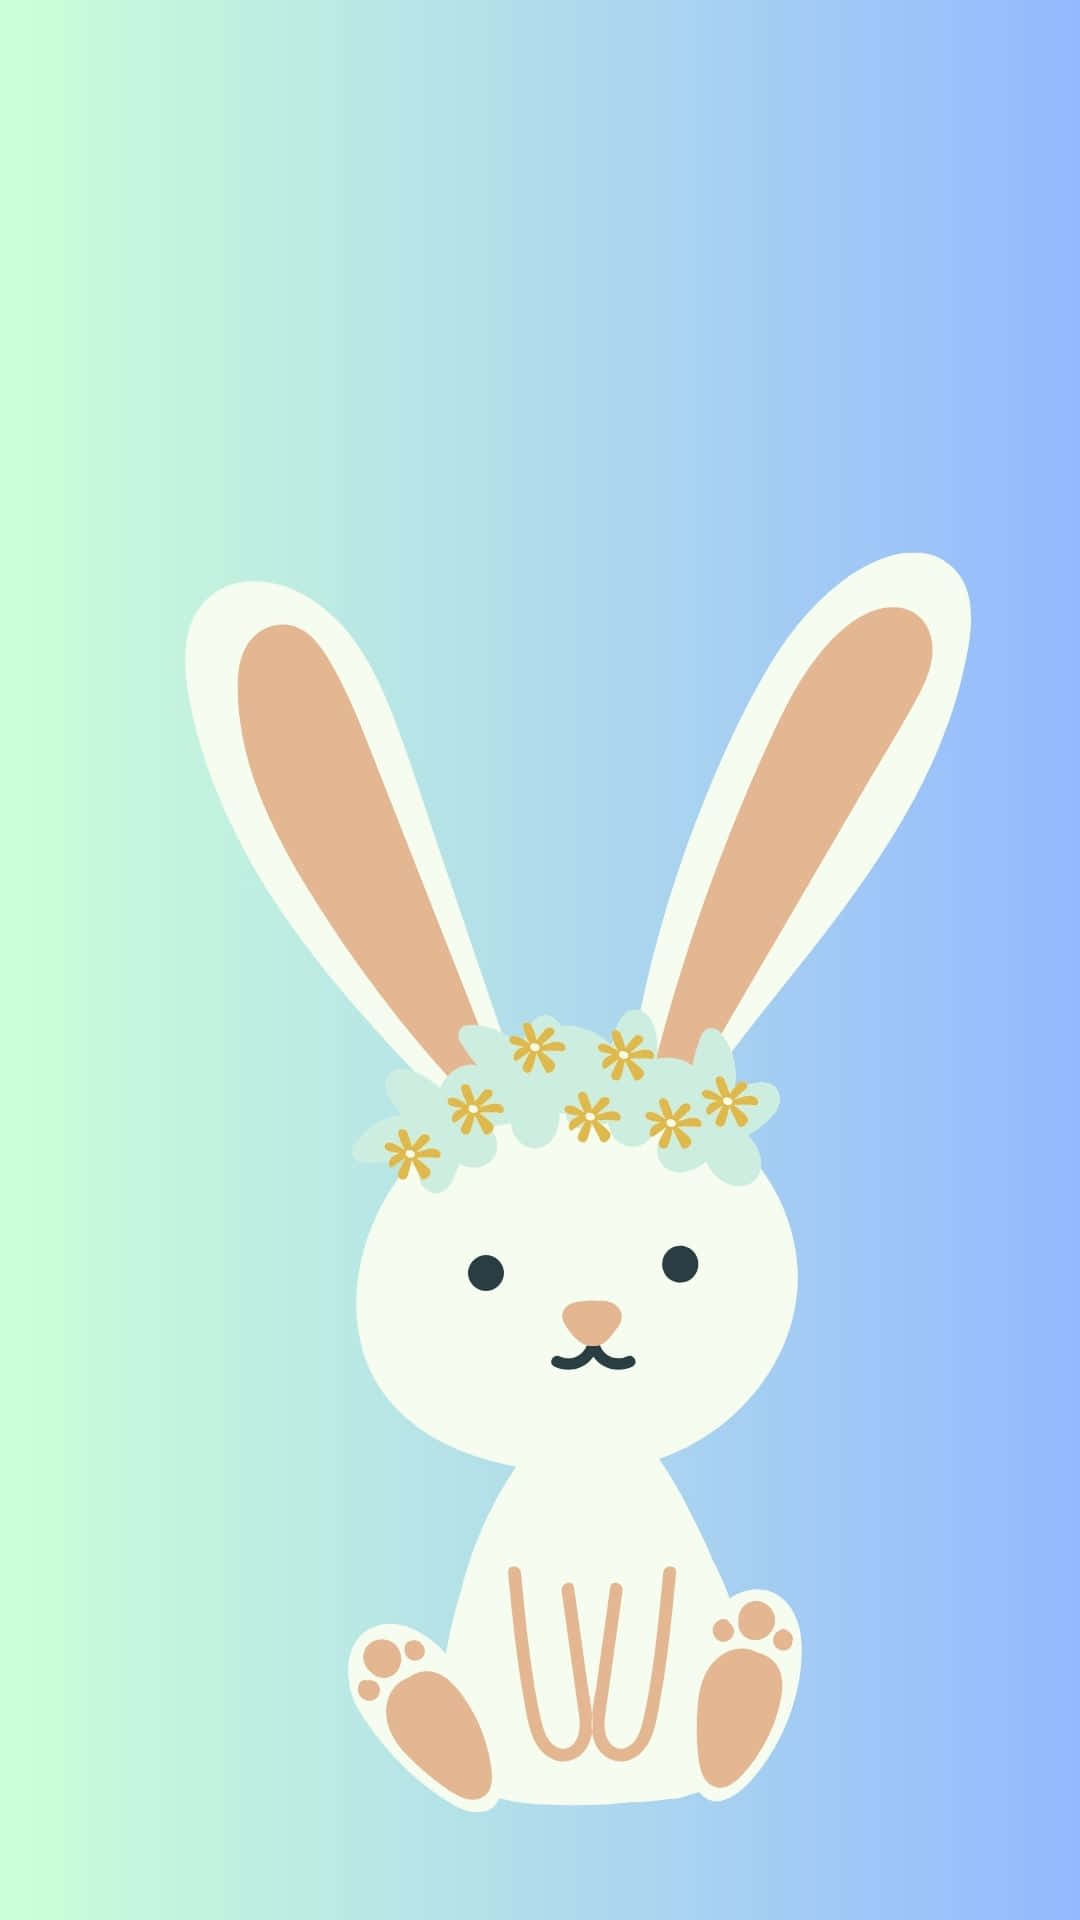 Get Ready For The Easter Party With This Fluffy Bunny! Background